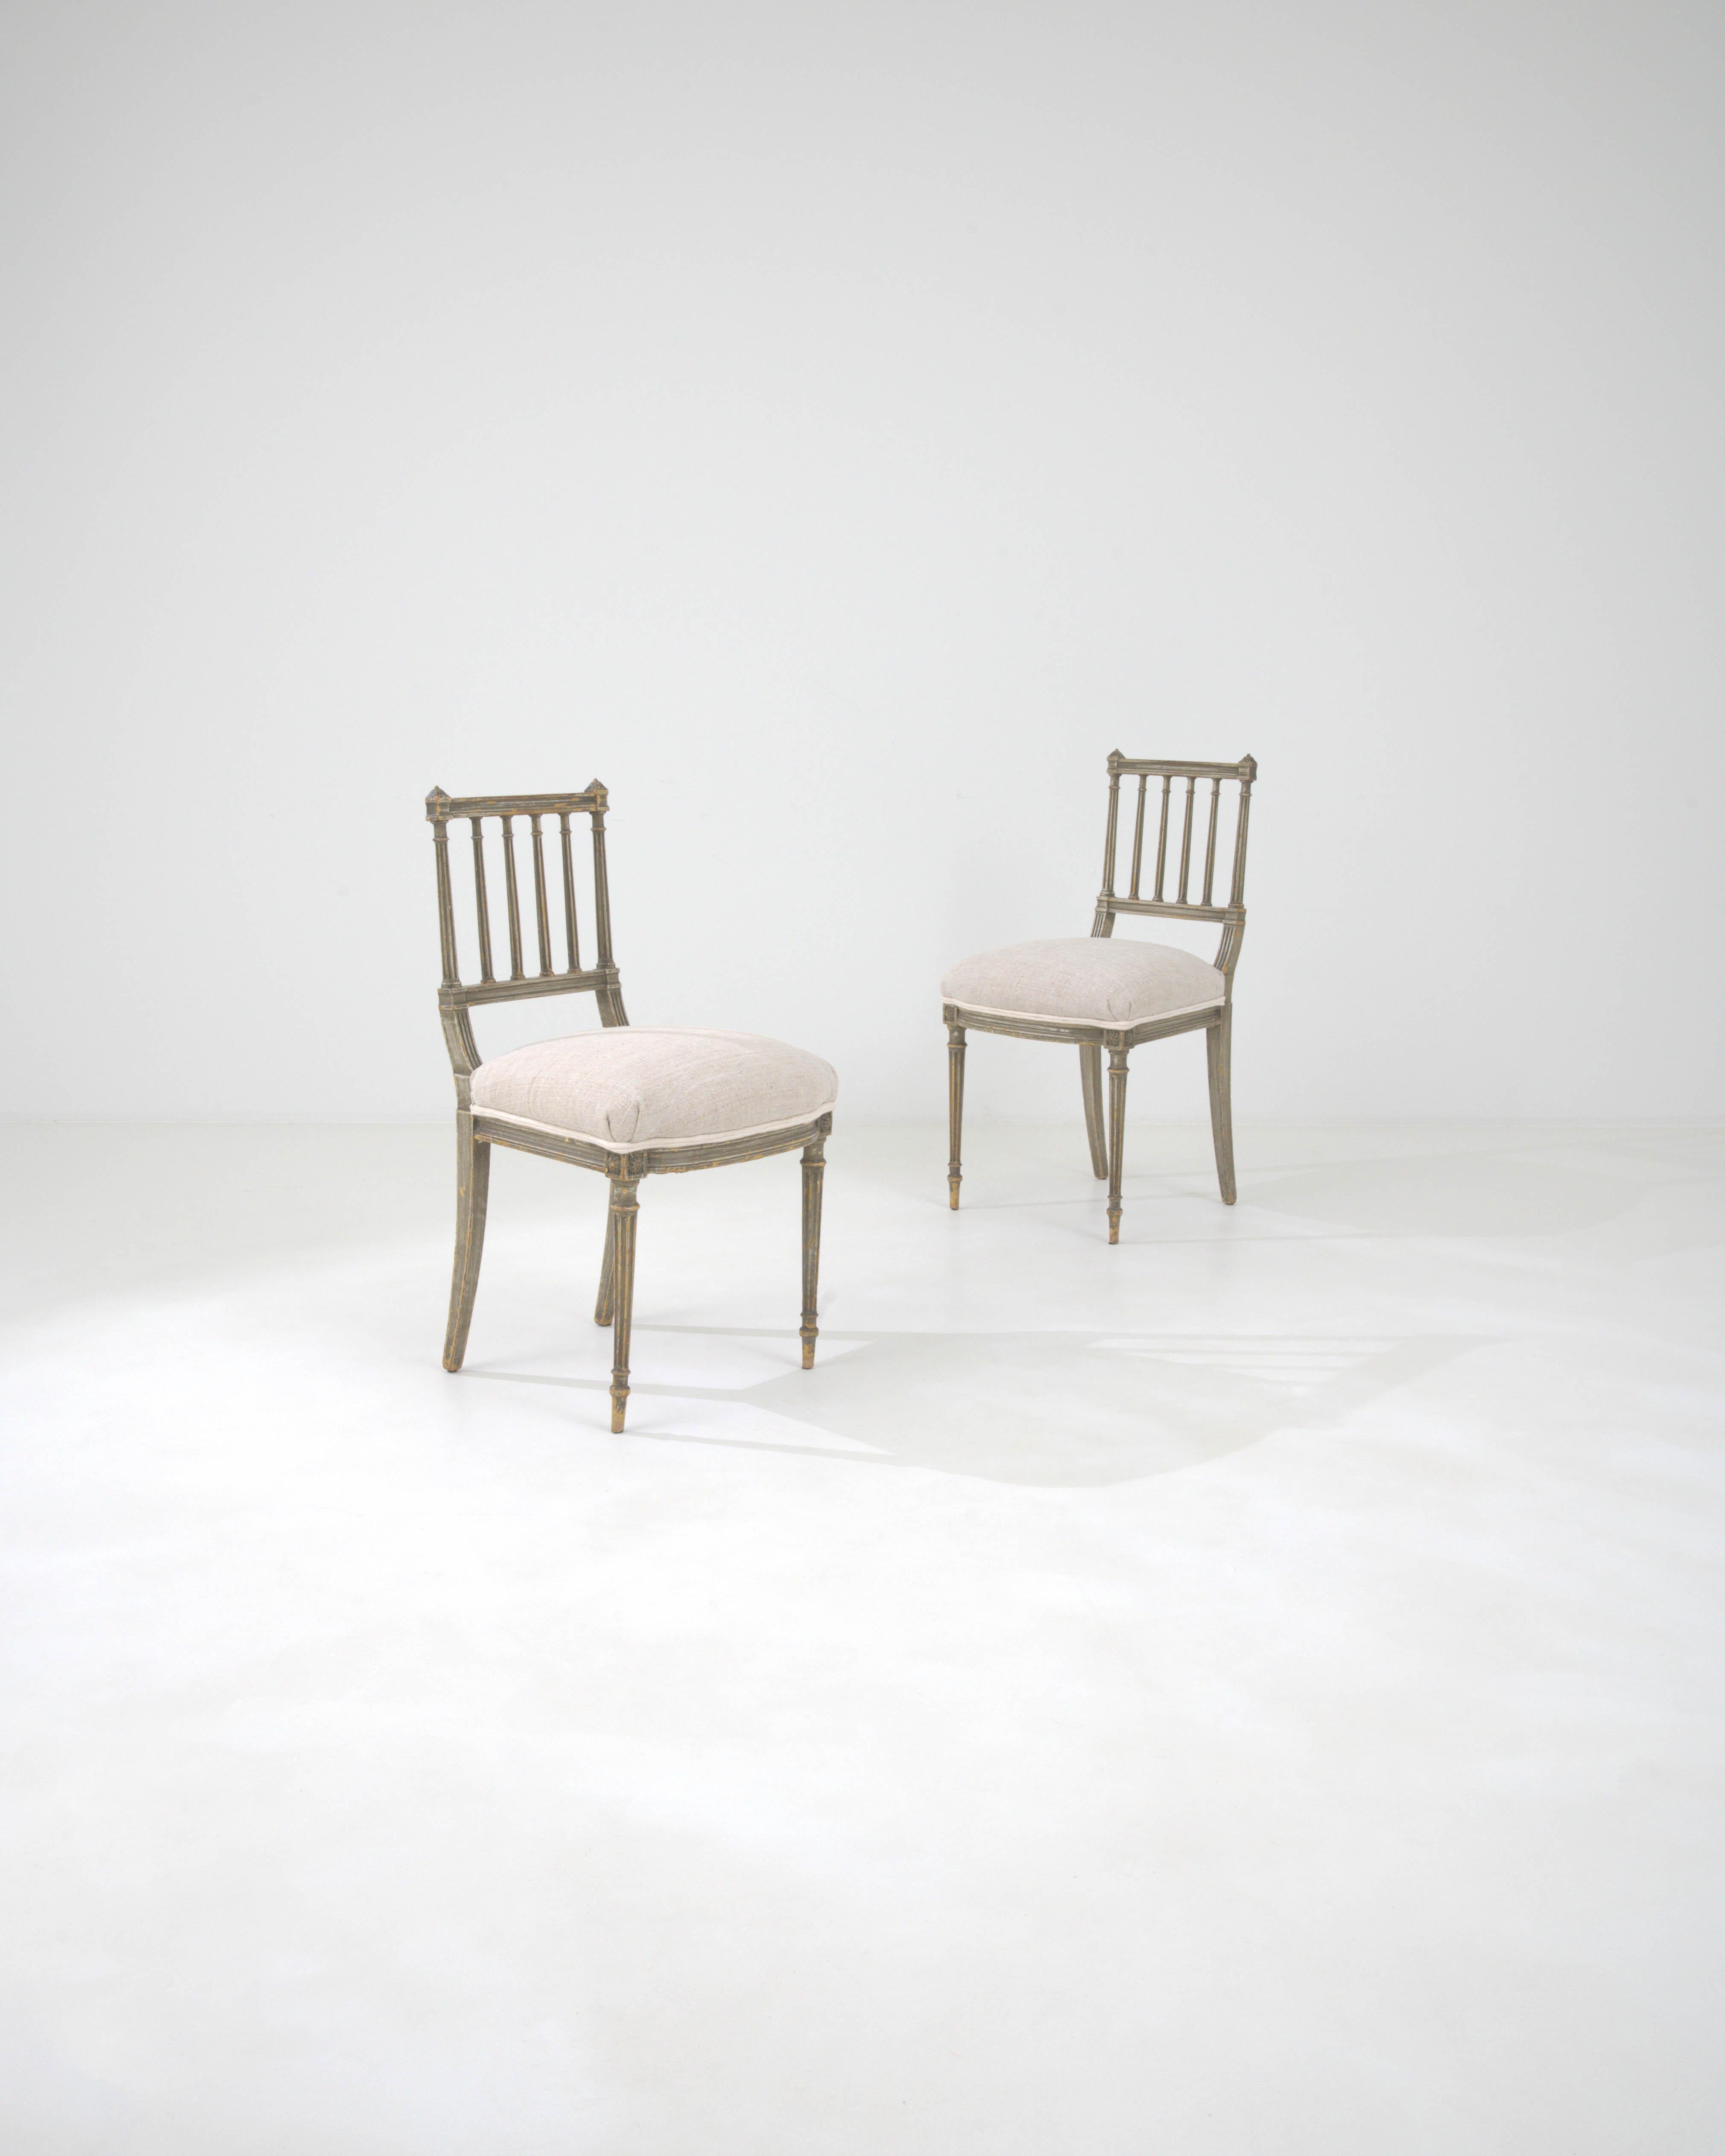 This exquisite pair of 1880s French dining chairs is a testament to the enduring elegance of 19th-century design. Each chair showcases the meticulous craftsmanship of the era with beautifully turned and fluted legs leading up to a classic,